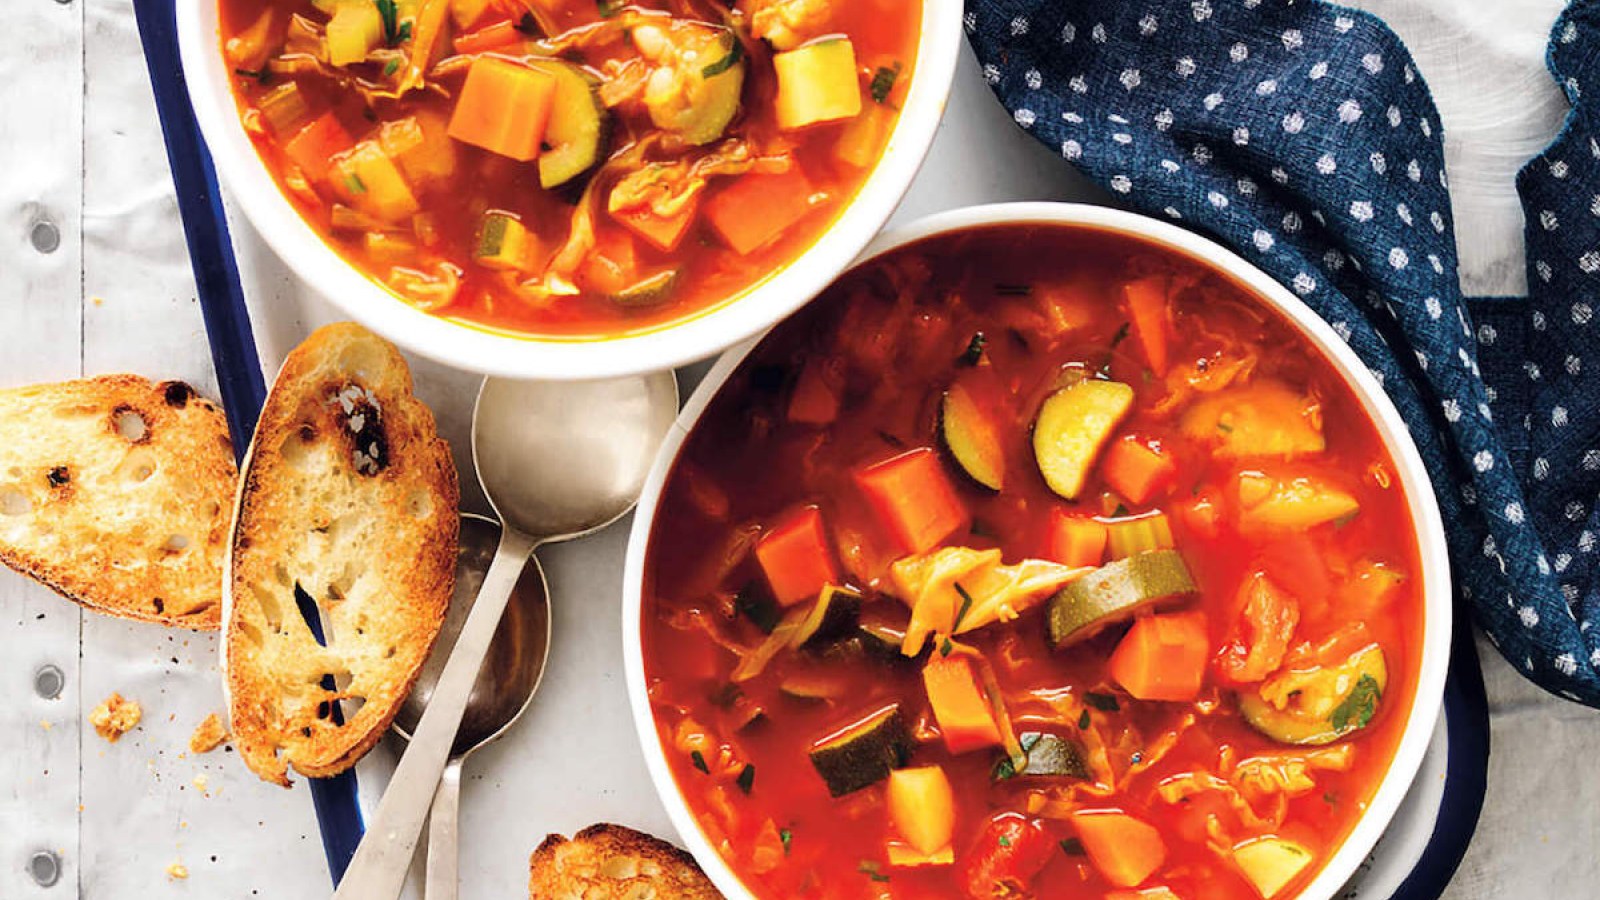 5 Mistakes to Avoid When Freezing Soup